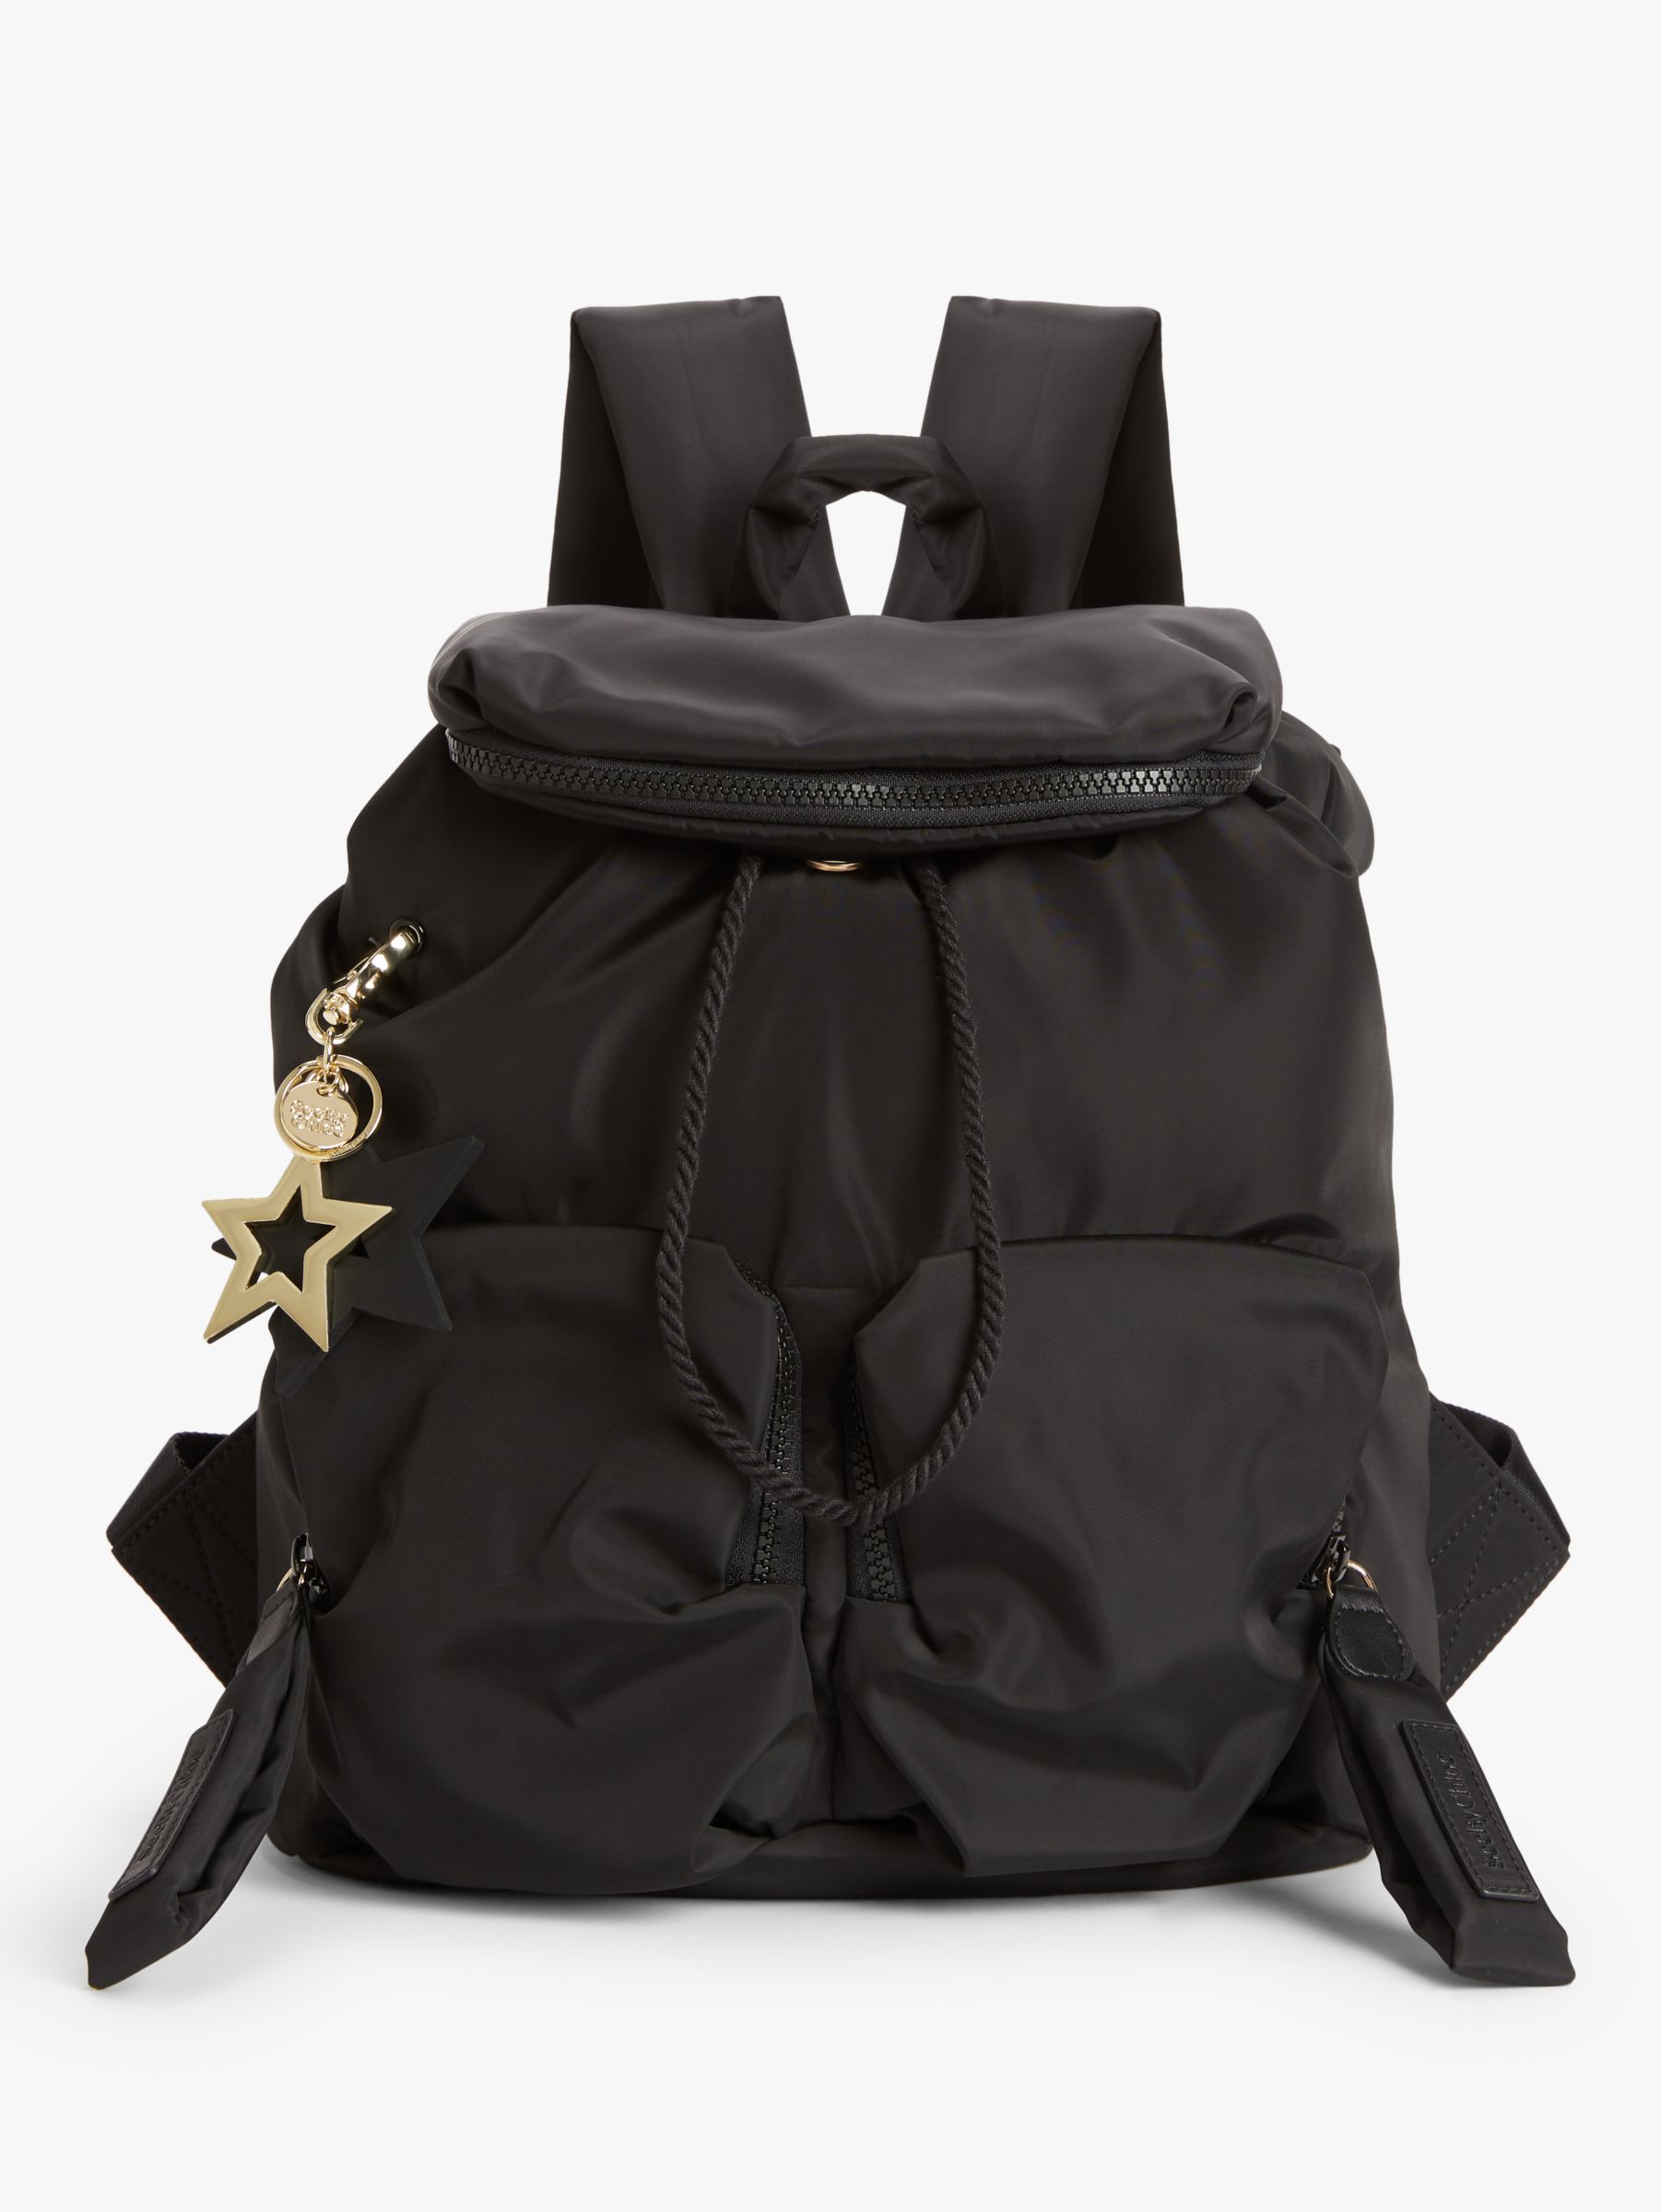 See By Chloé Joy Rider Zipped Backpack at John Lewis & Partners